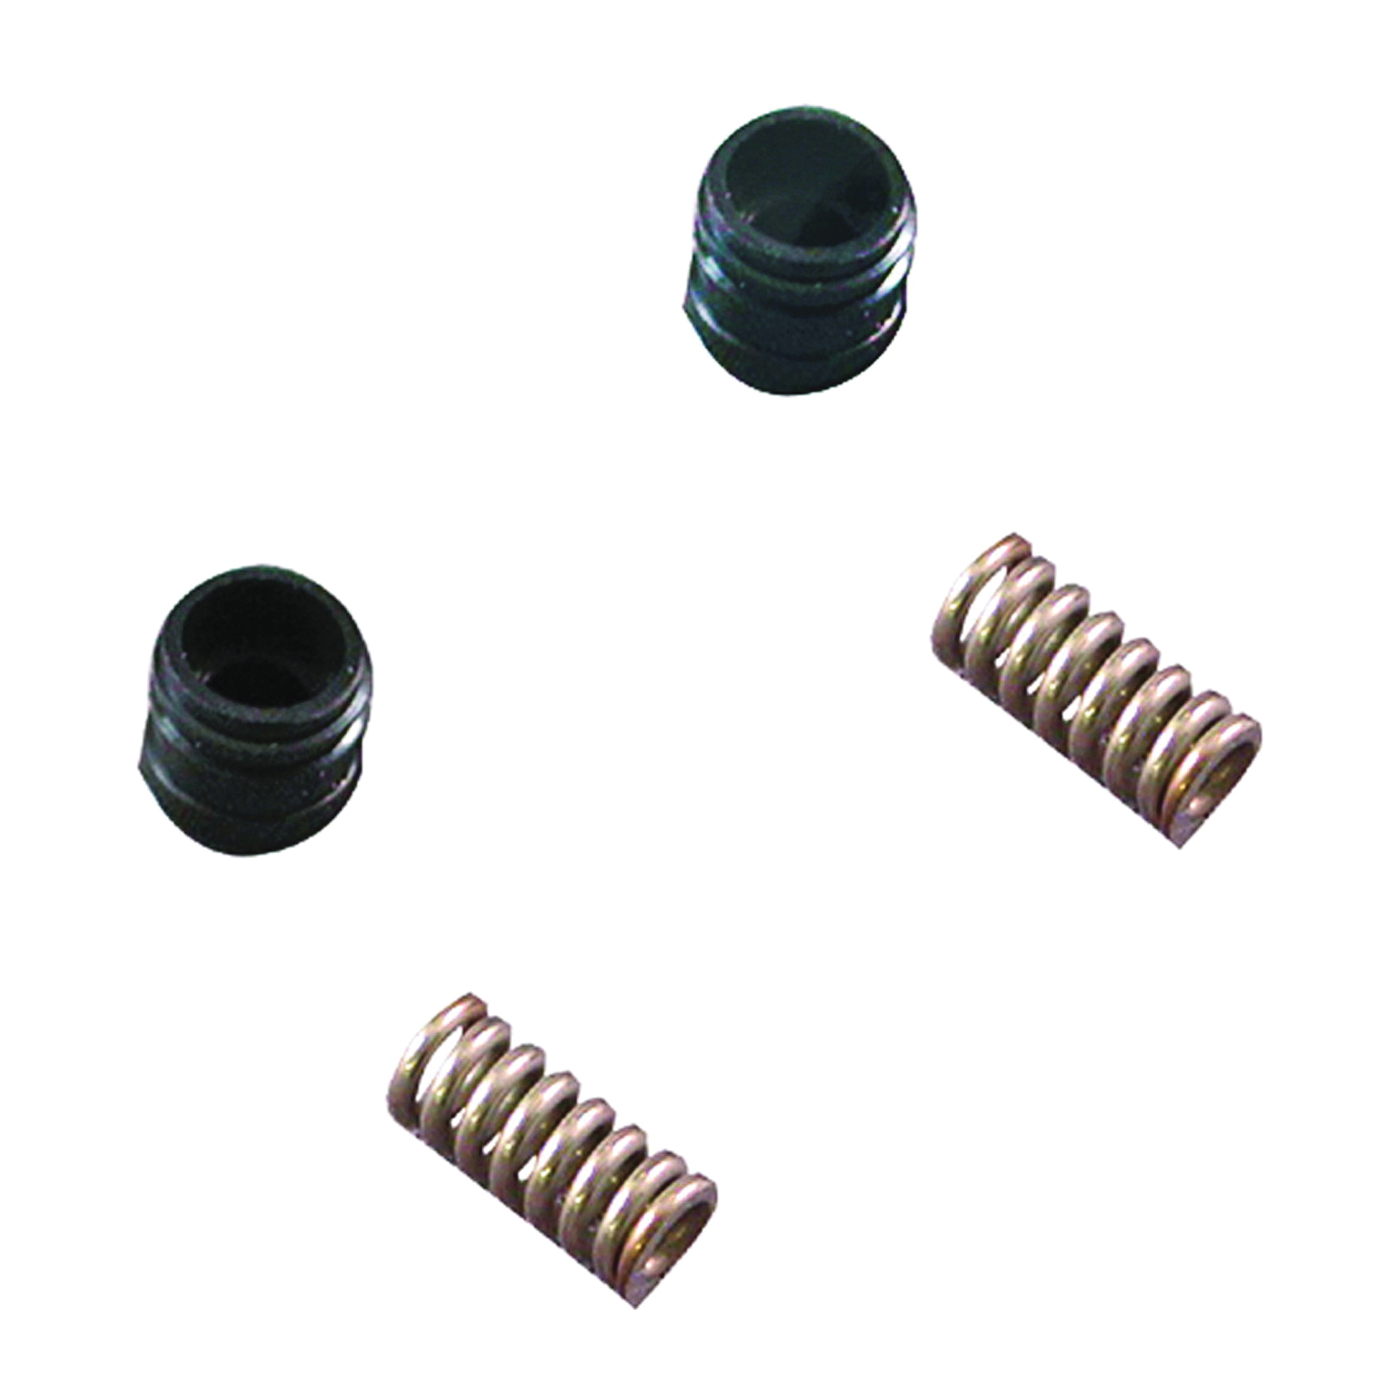 88005 Seat and Spring Set, Black, For: Milwaukee/Sears Model 2S-1H/C, 3S-7H/C and 4S-6H/C Faucet Stems